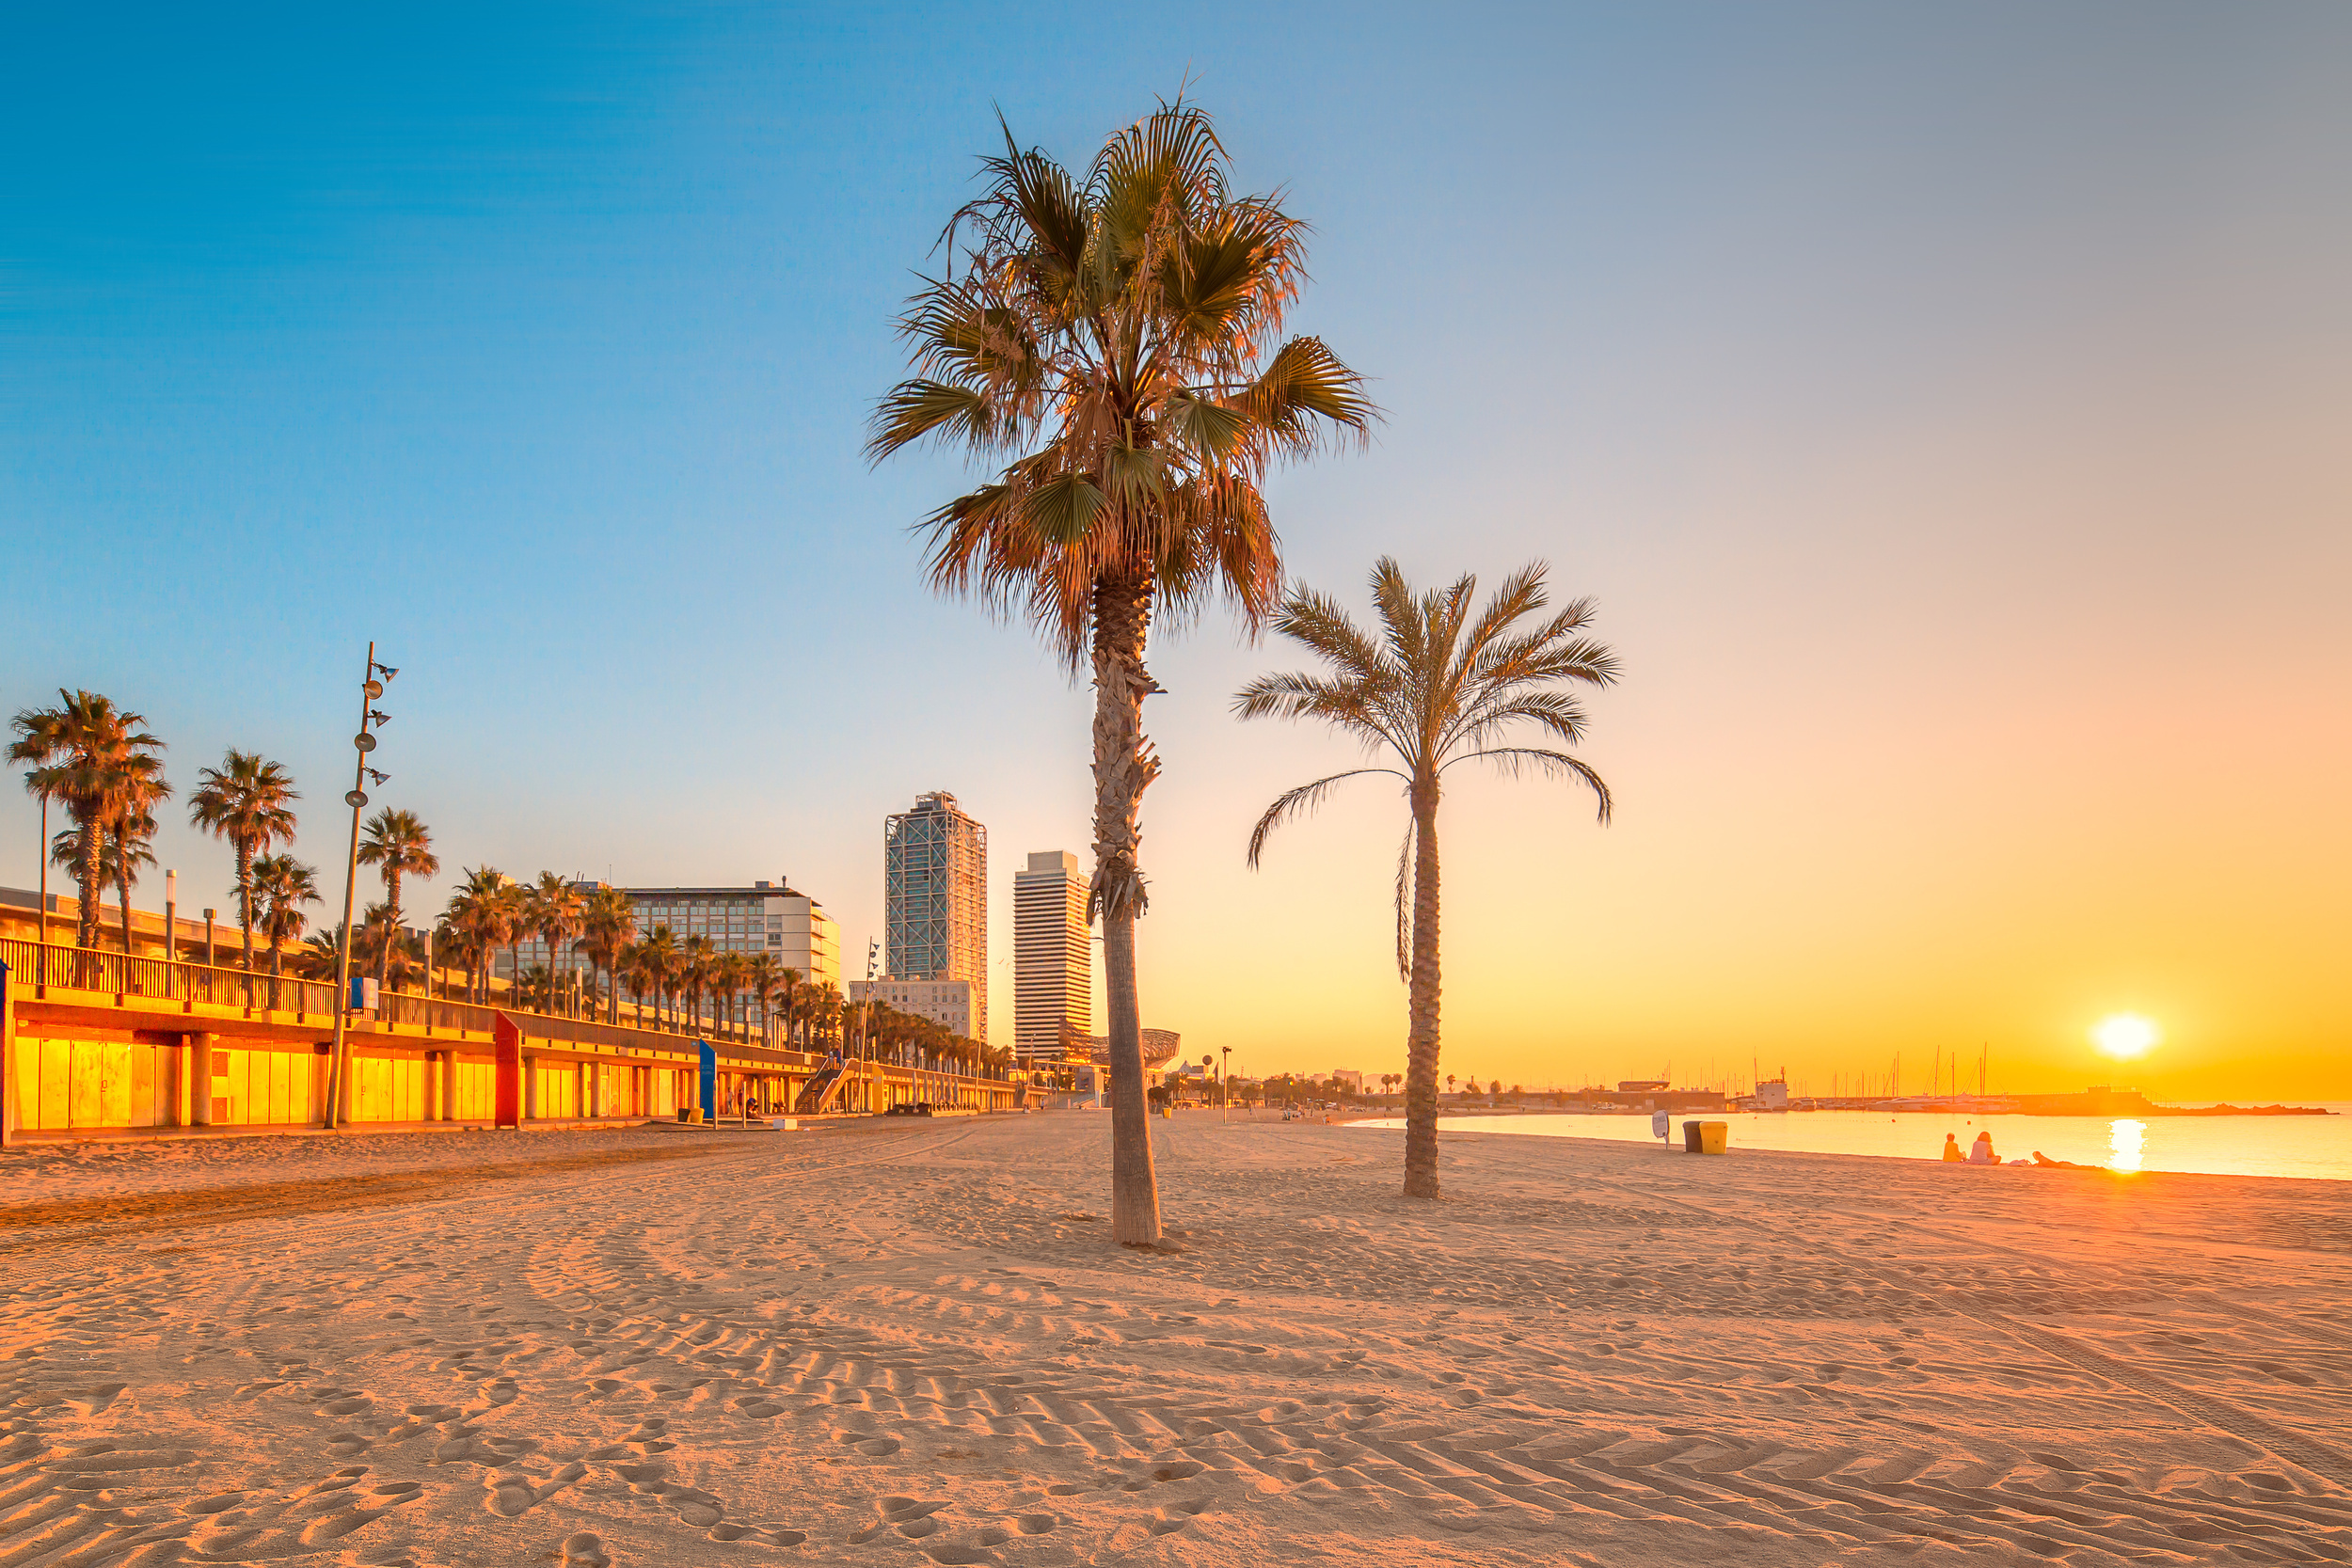 <p>There’s a reason people can’t get enough of Barcelona, to the point that, back in 2015, some residents put a sign on one of the beaches telling tourists to go home. Now, the tensions have cooled a bit, and you can enjoy this cosmopolitan city and its numerous beaches without fear of being told to leave!</p><p>You may also like: <a href='https://www.yardbarker.com/lifestyle/articles/20_items_you_should_declutter_from_your_home_right_now_120123/s1__38830539'>20 items you should declutter from your home right now</a></p>